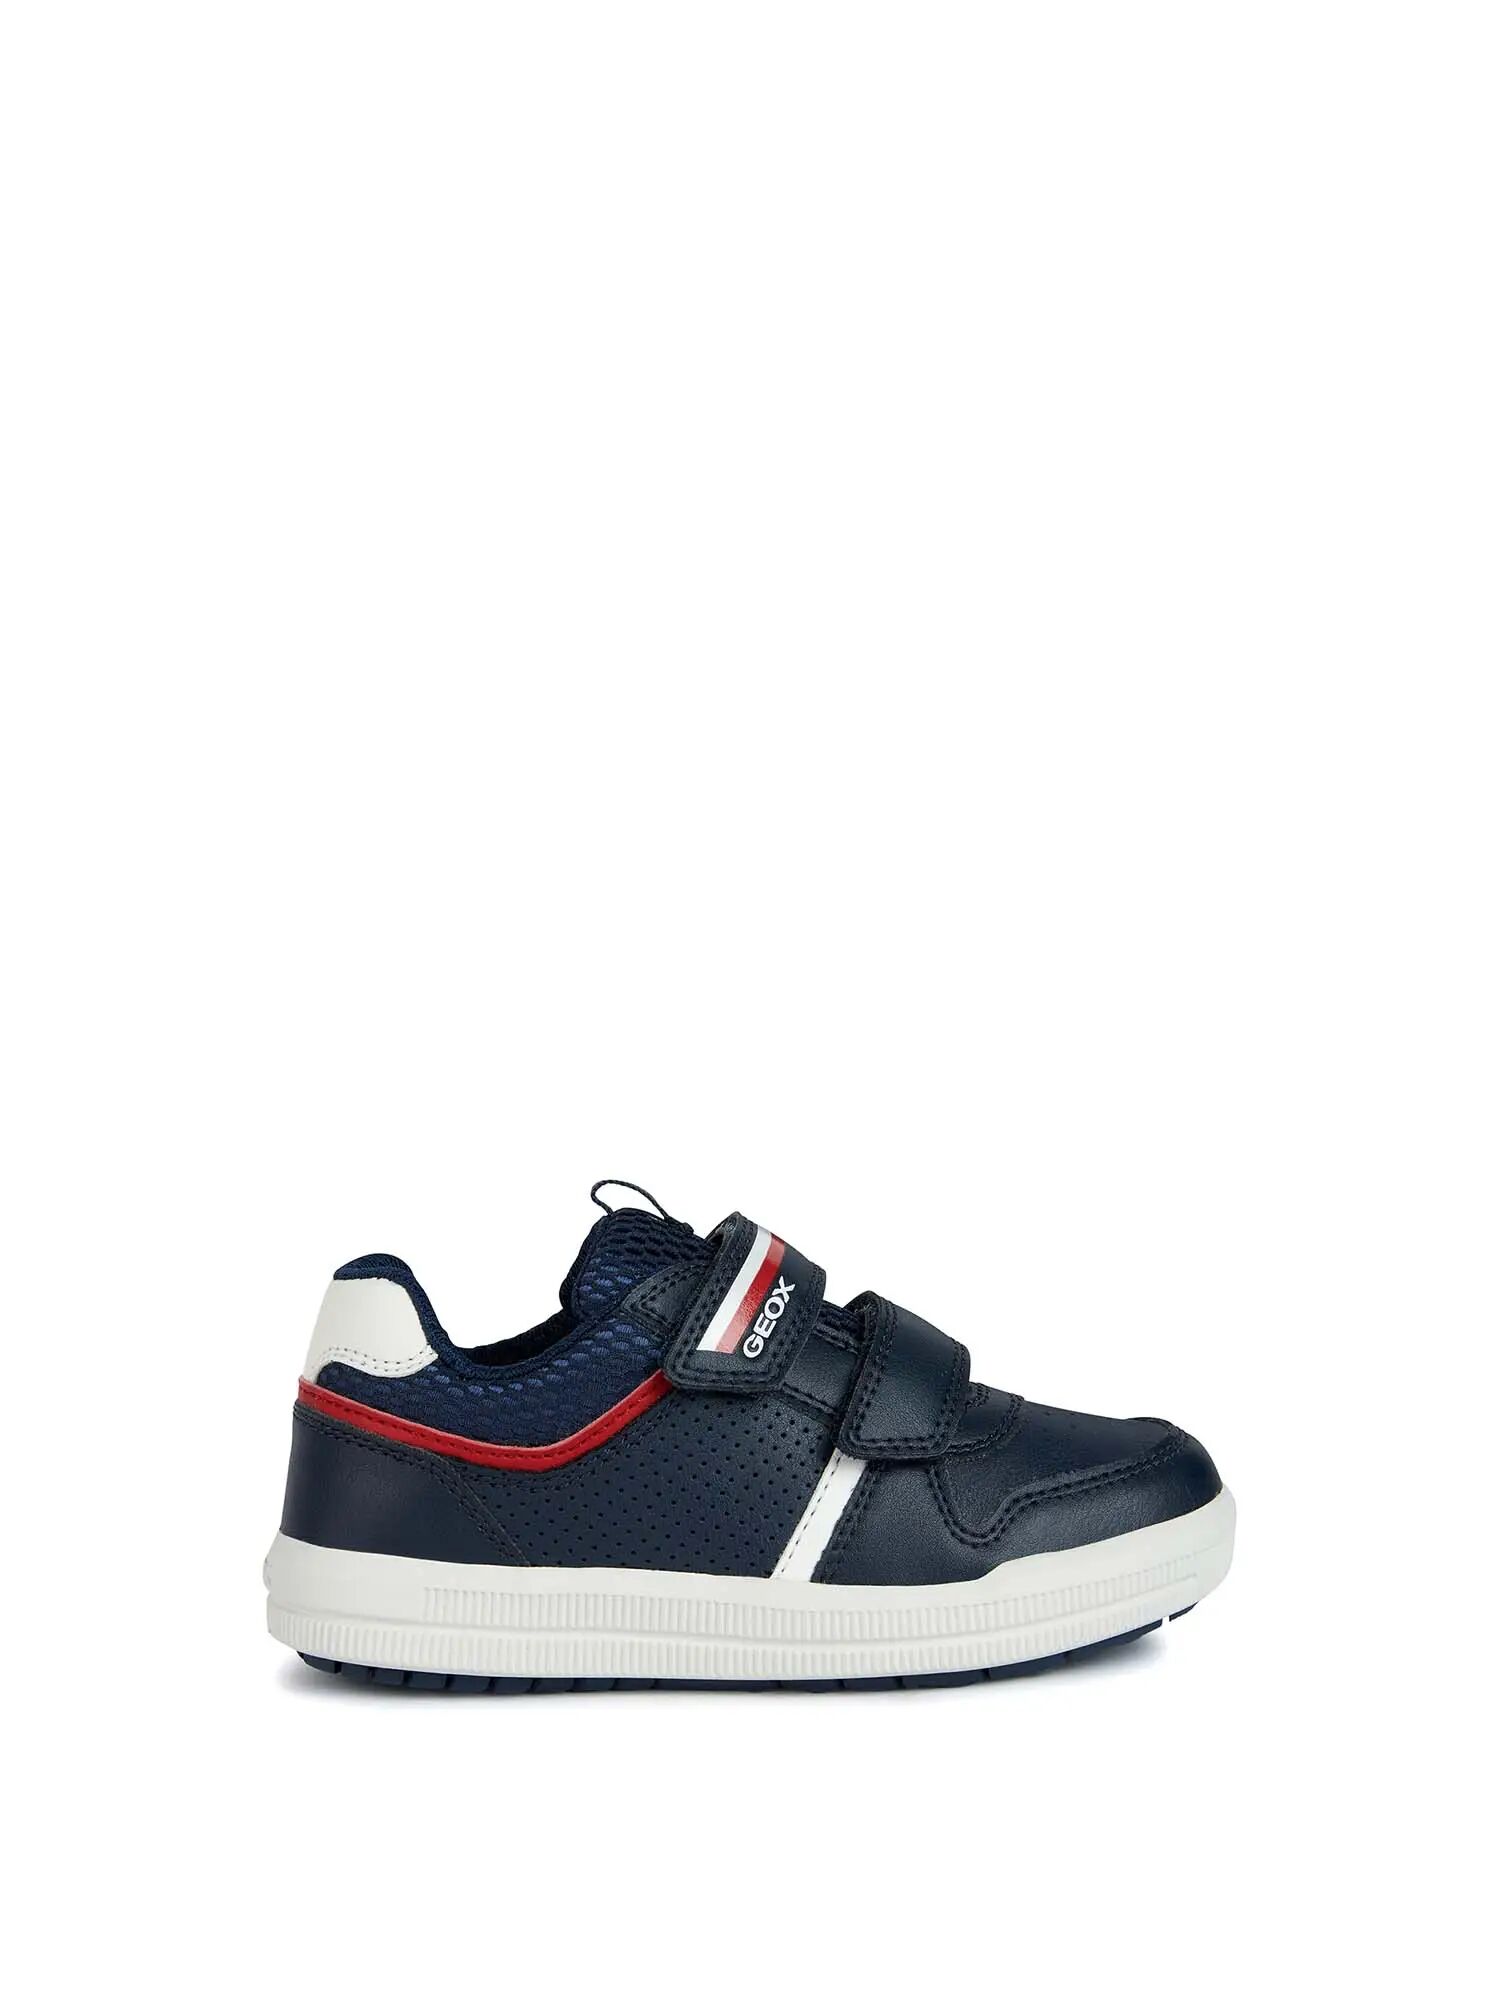 Geox Sneakers Ragazzo Colore Navy/rosso NAVY/ROSSO 28